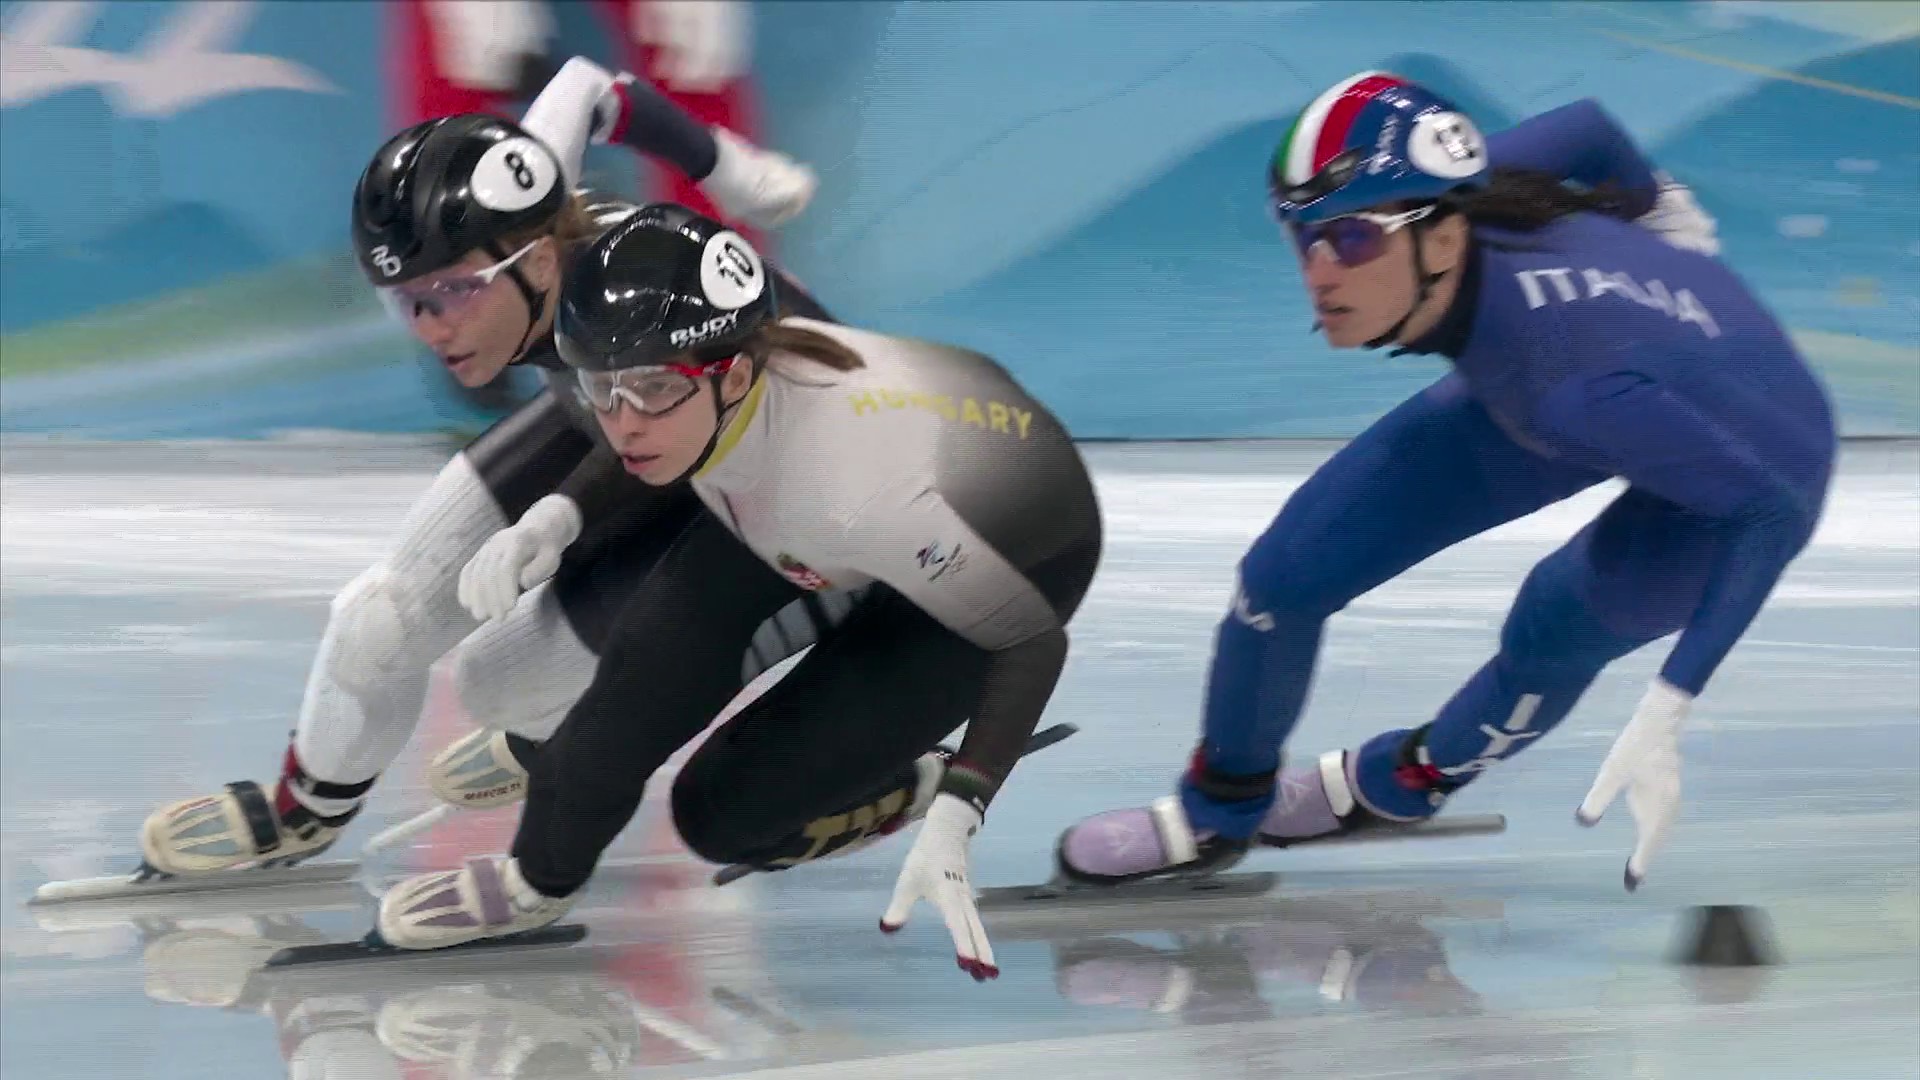 NBC on Twitter: ""It's like @NASCAR on ice!" If love speed, you'll love short track at the #WinterOlympics. Let explain why it's must-see TV. Tune in tonight at